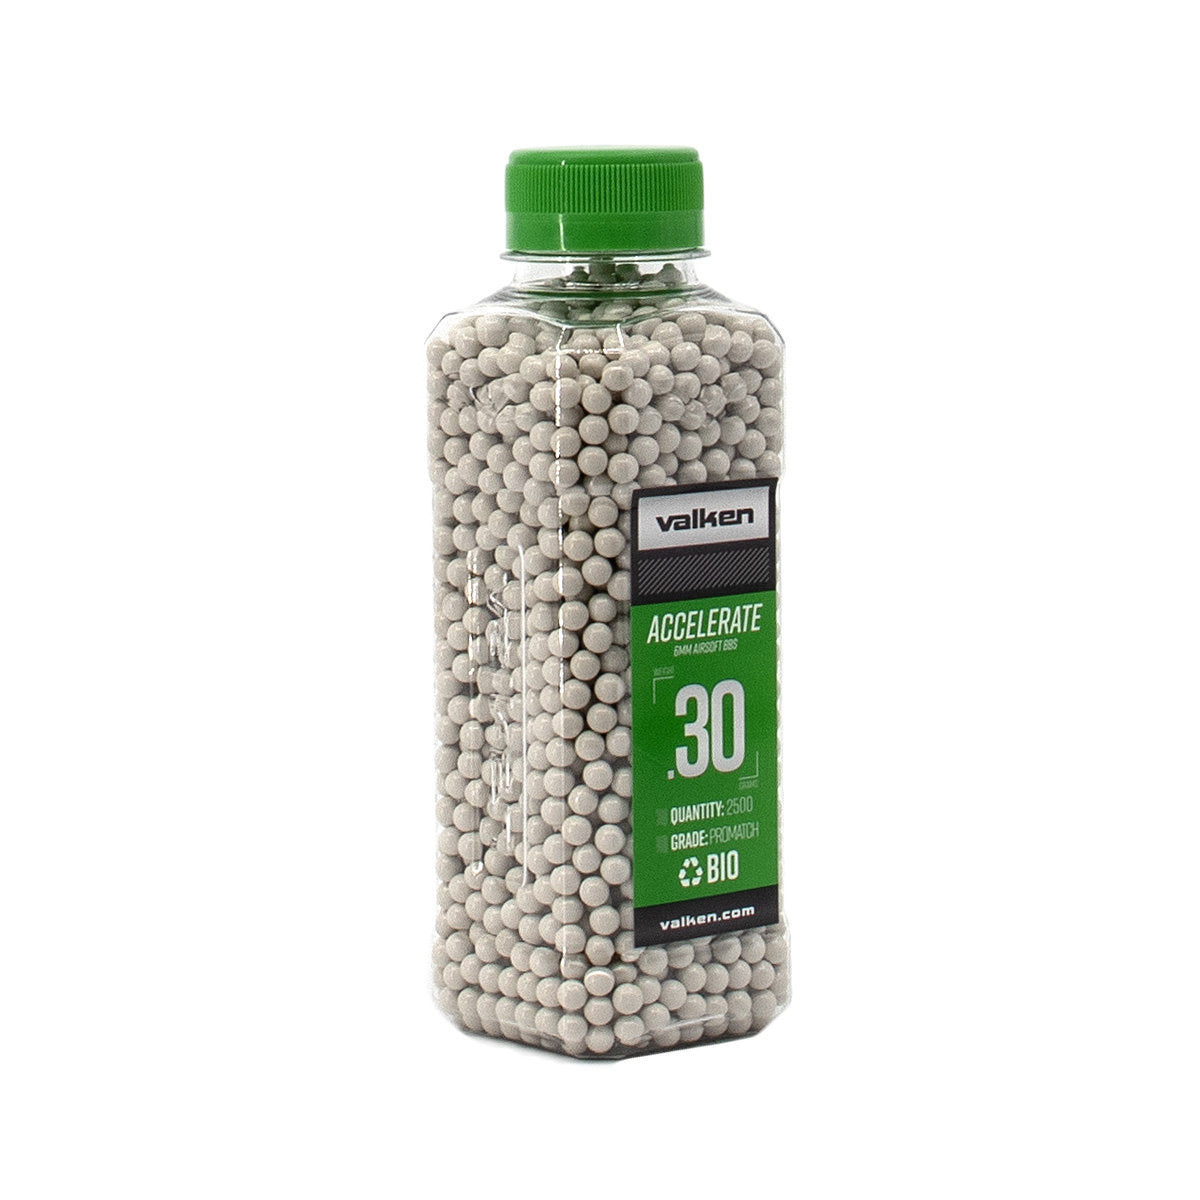 Valken Accelerate Promatch 0.30G 2,500Ct Biodegradable Airsoft Bbs